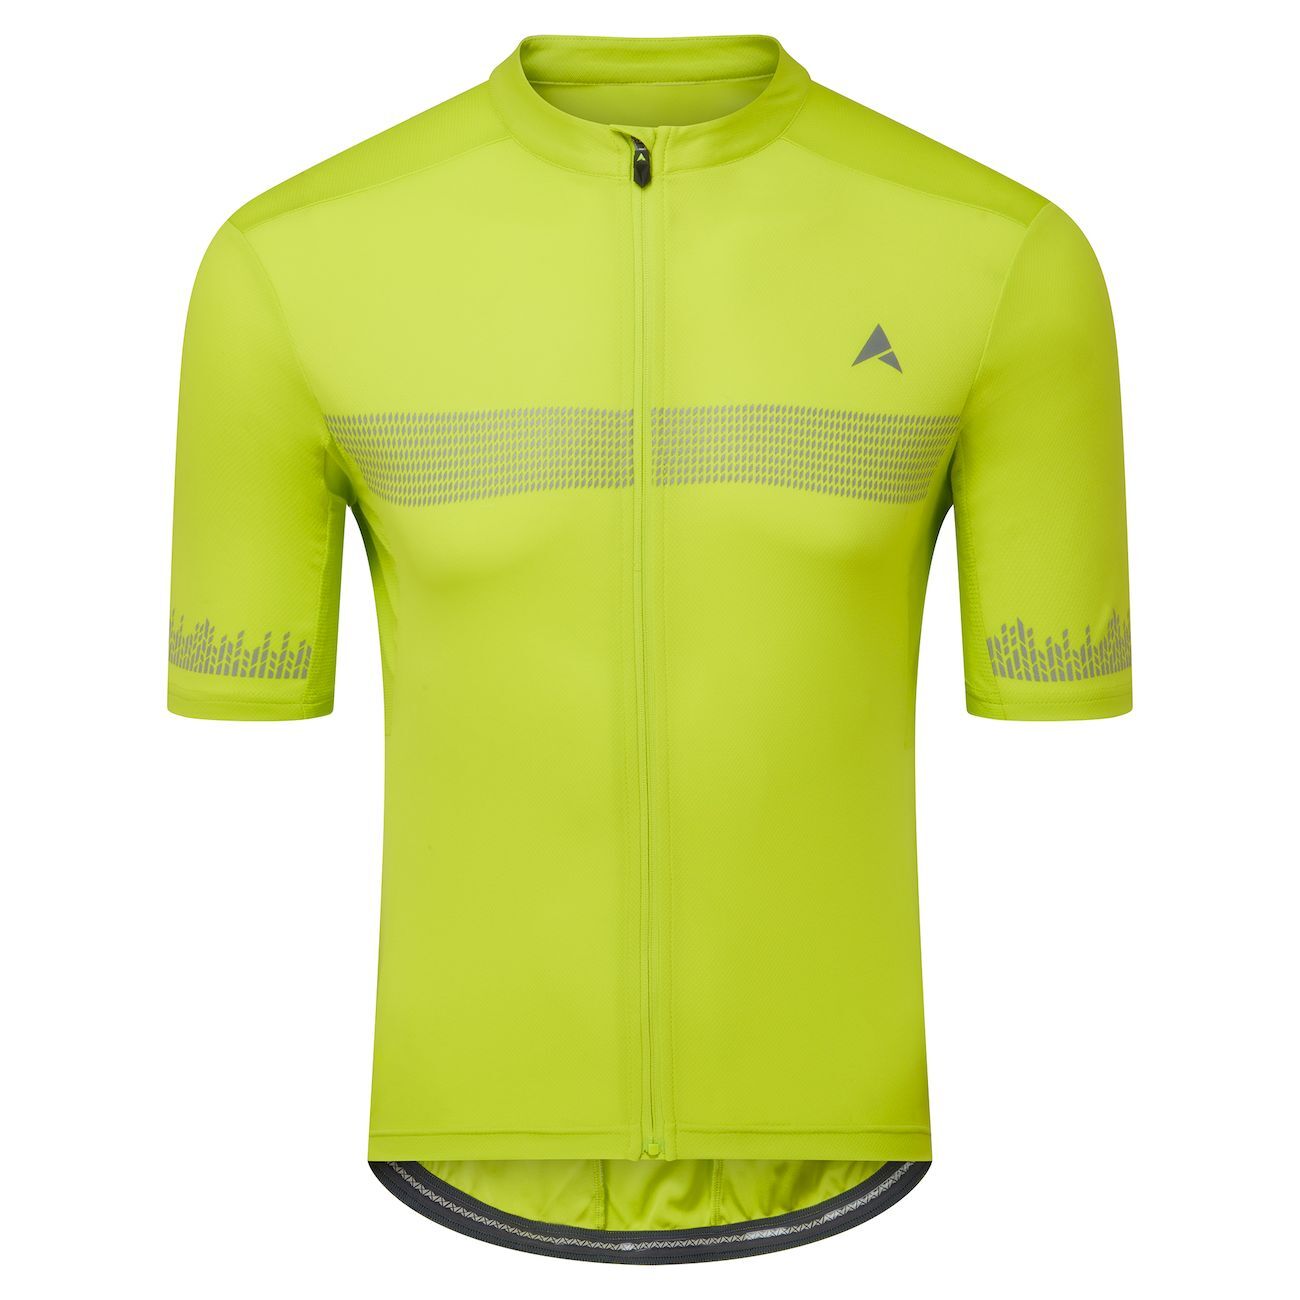 Altura Maillot Manches Courtes Nightvision - Cyklistické dres | Hardloop